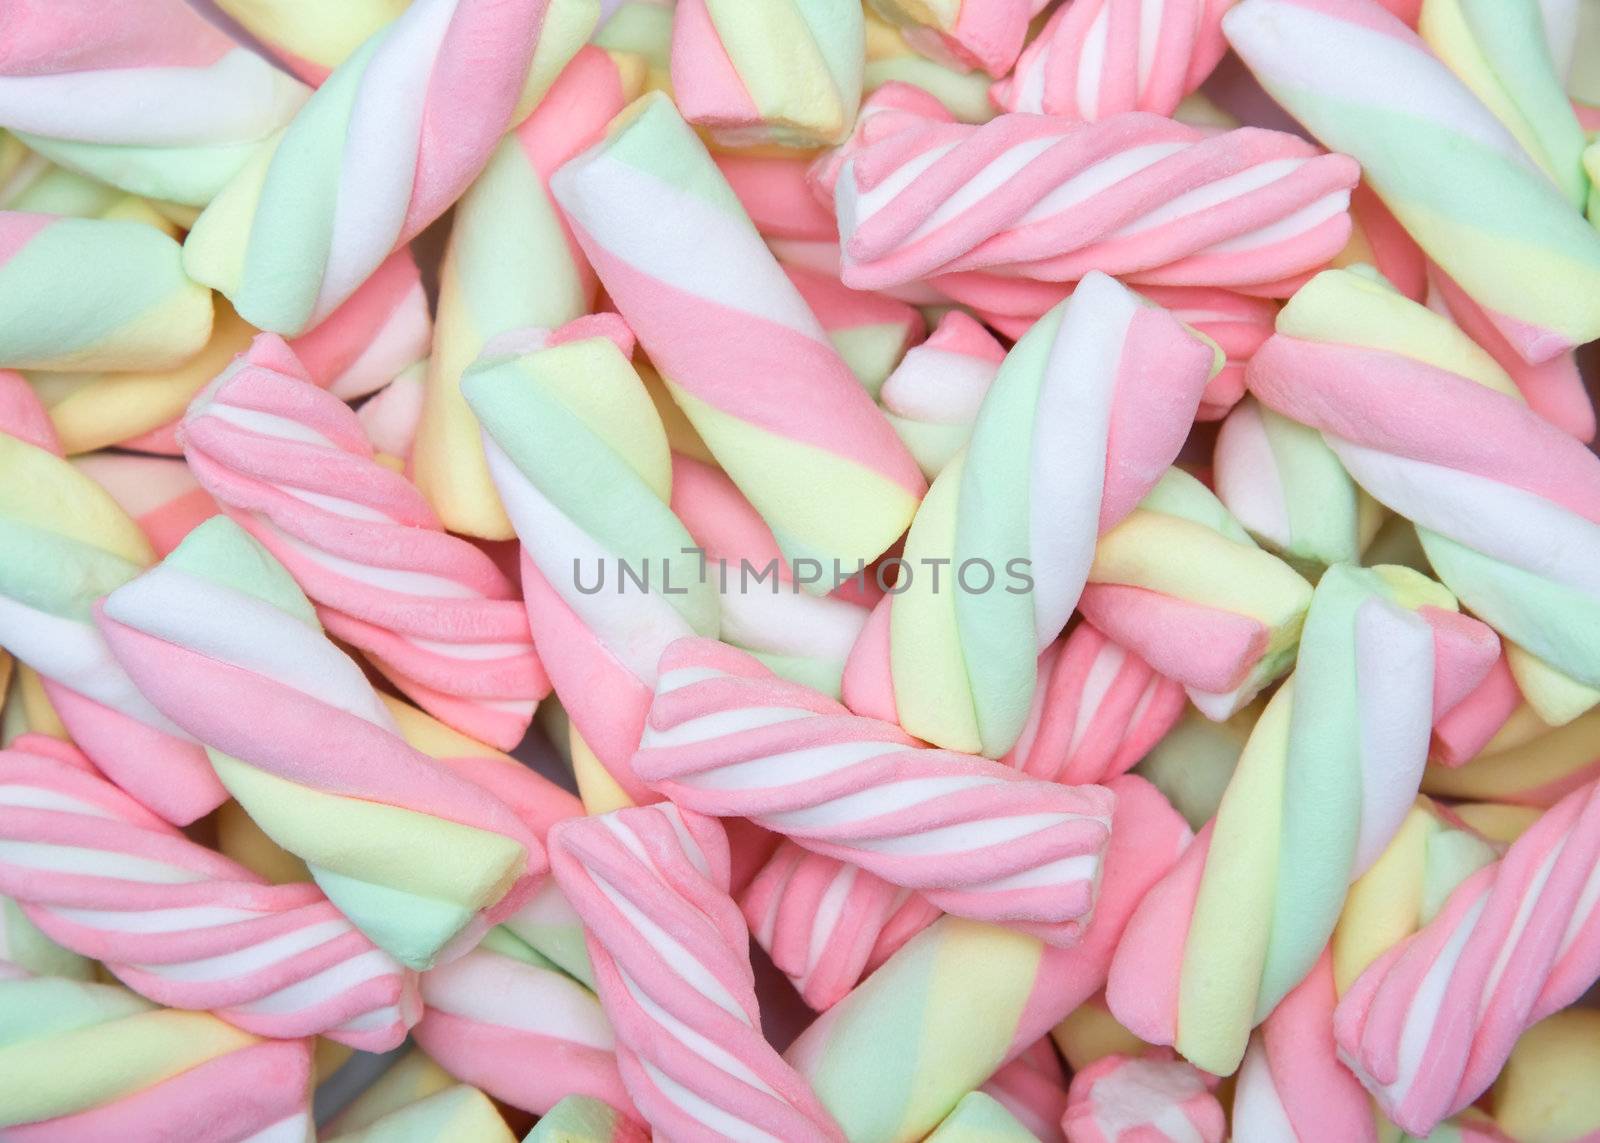 Brightly colored marshmallows